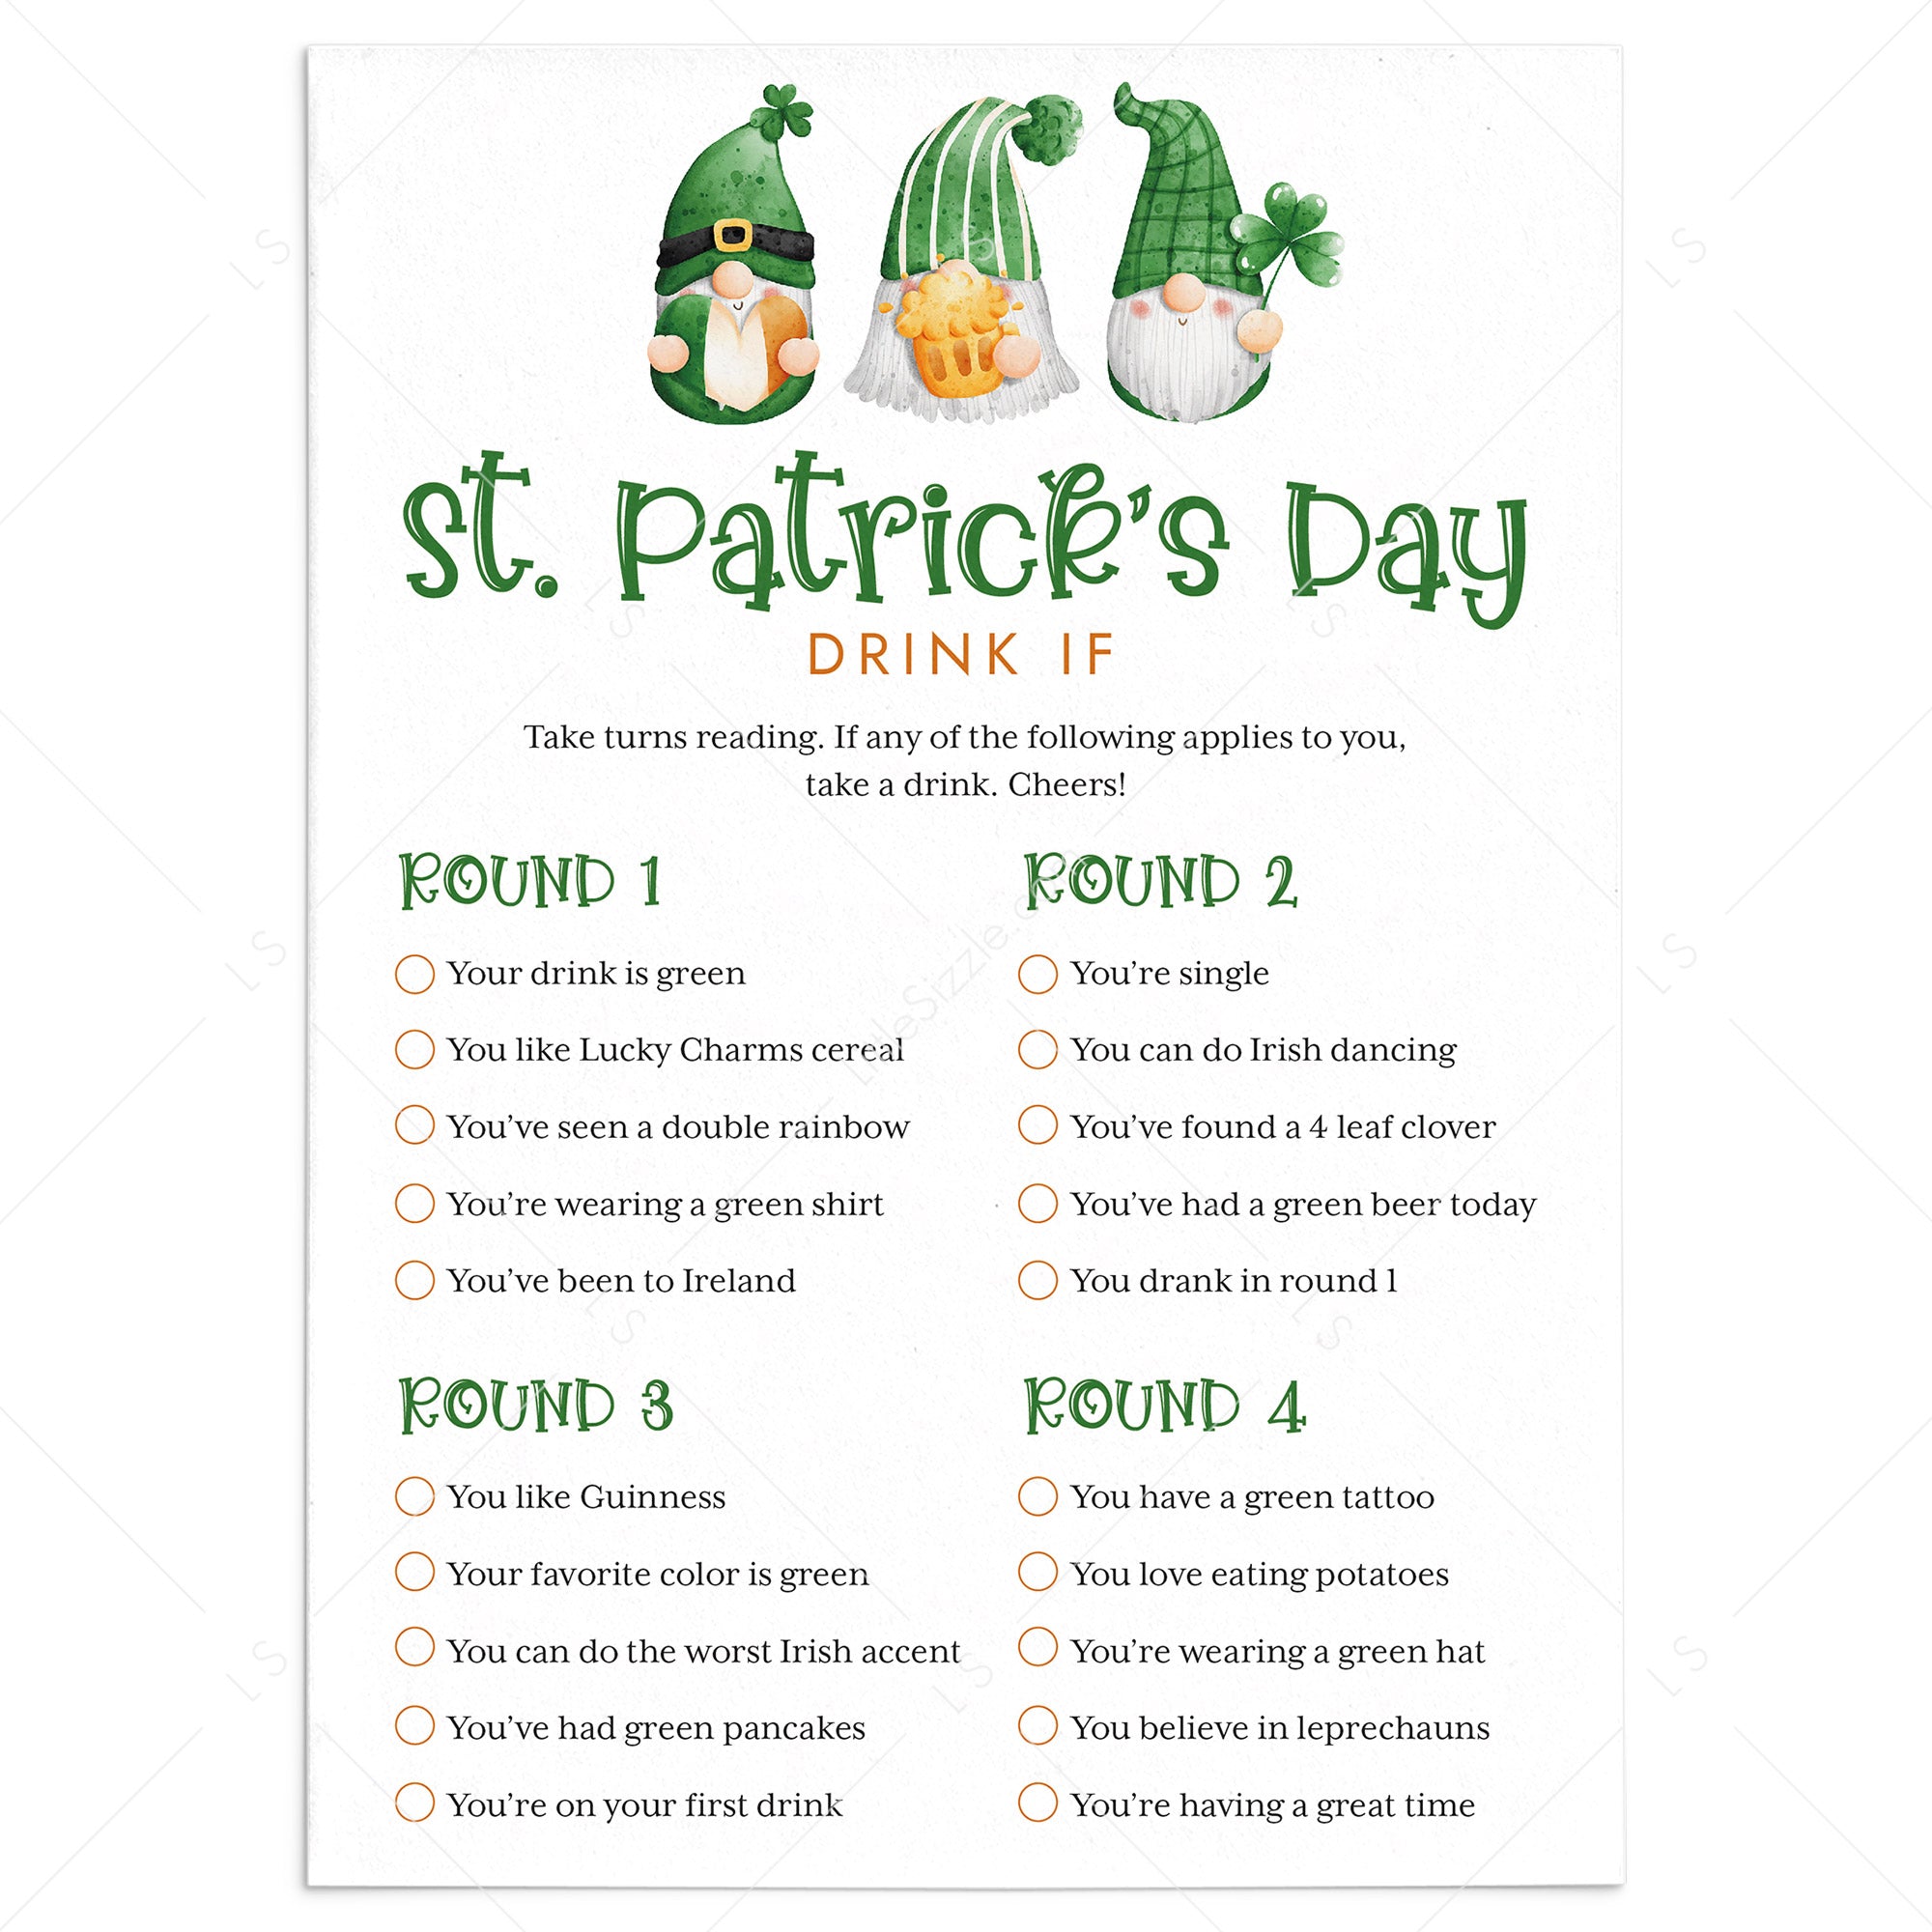 Saint Patrick's Day Game for Adults Drink If Printable by LittleSizzle